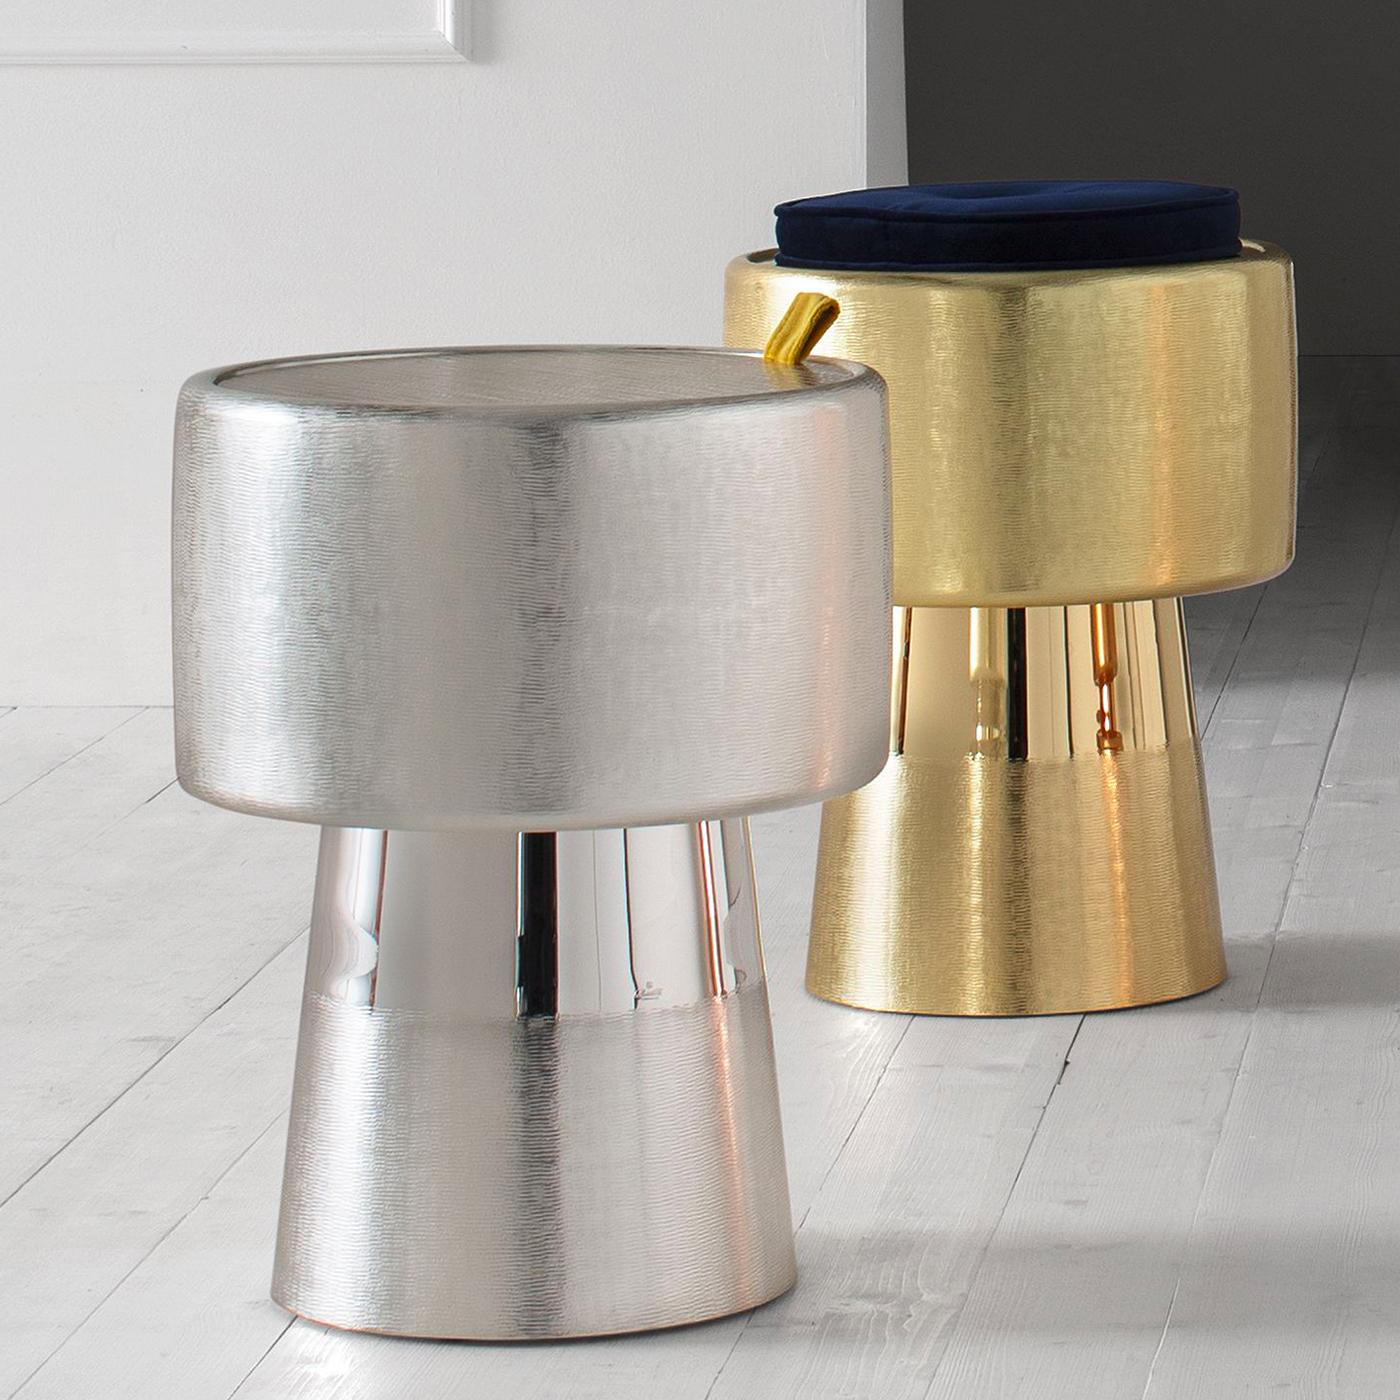 Functioning as a side table, a box or a champagne bucket, this sculptural piece is a unique work of art that features an opening mechanism with a yellow velvet flap that helps to remove the top. Made entirely of silver, it boasts a brushed finish